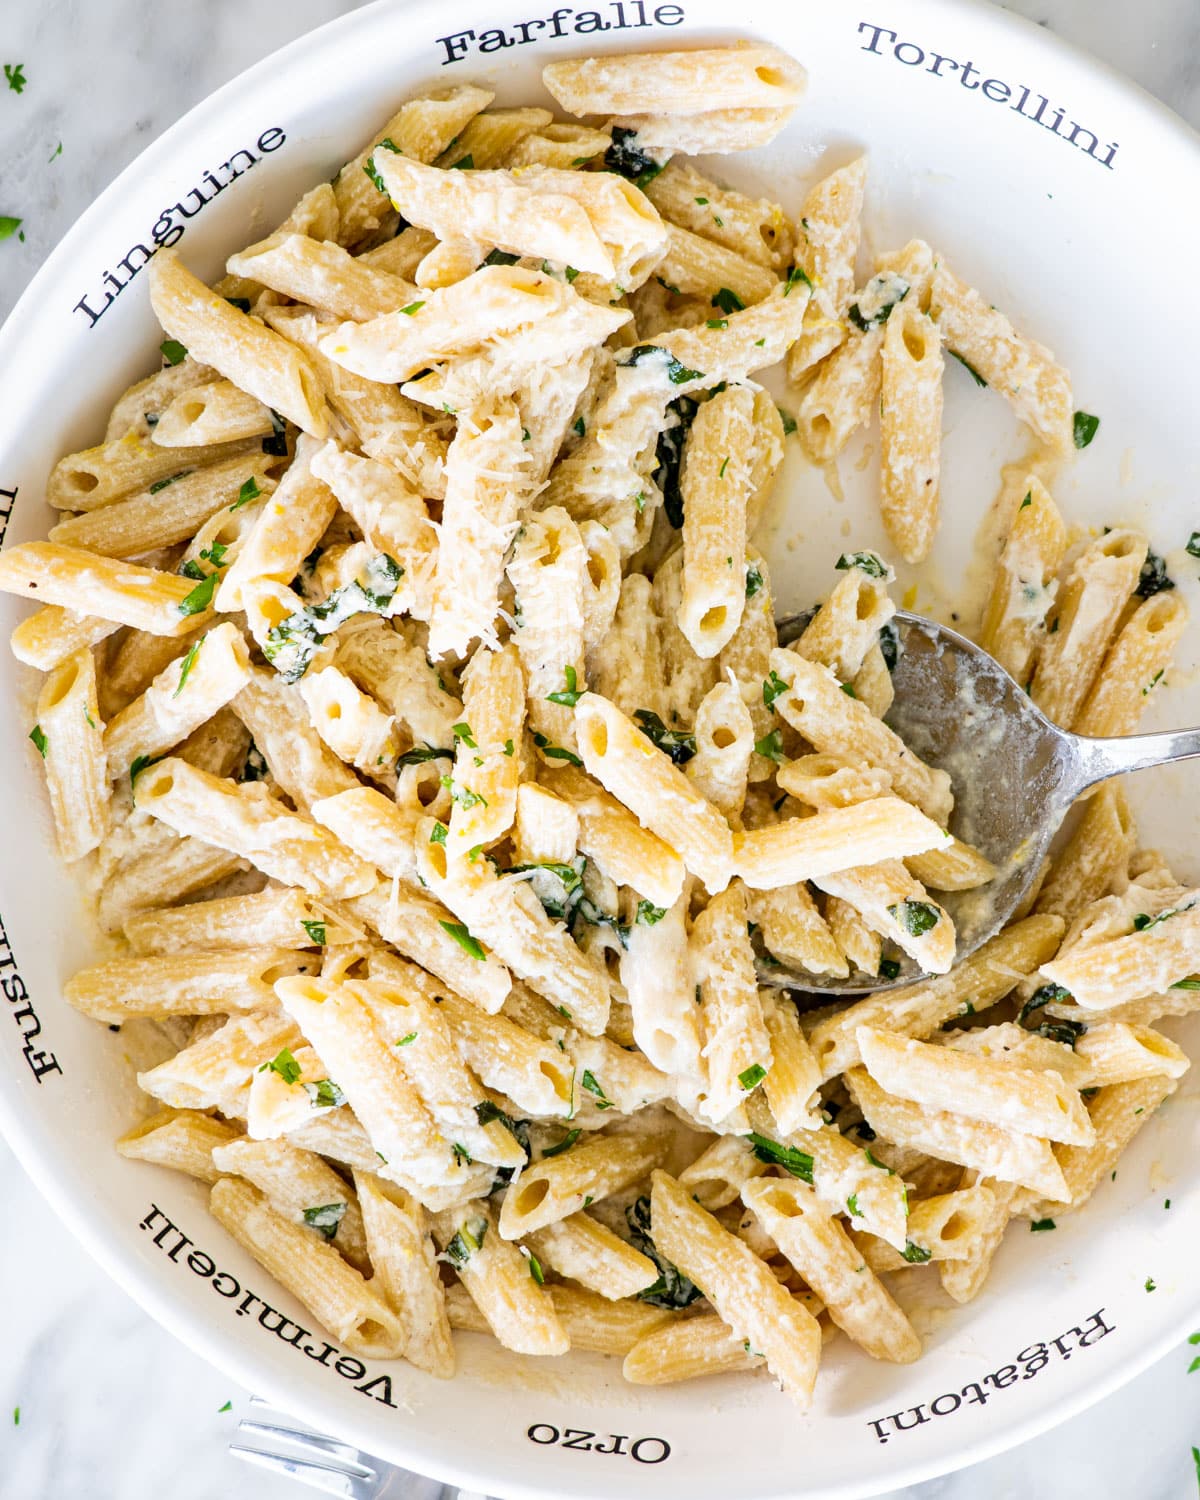 creamy goat cheese pasta in a pasta bowl garnished with fresh parsley and parmesan cheese